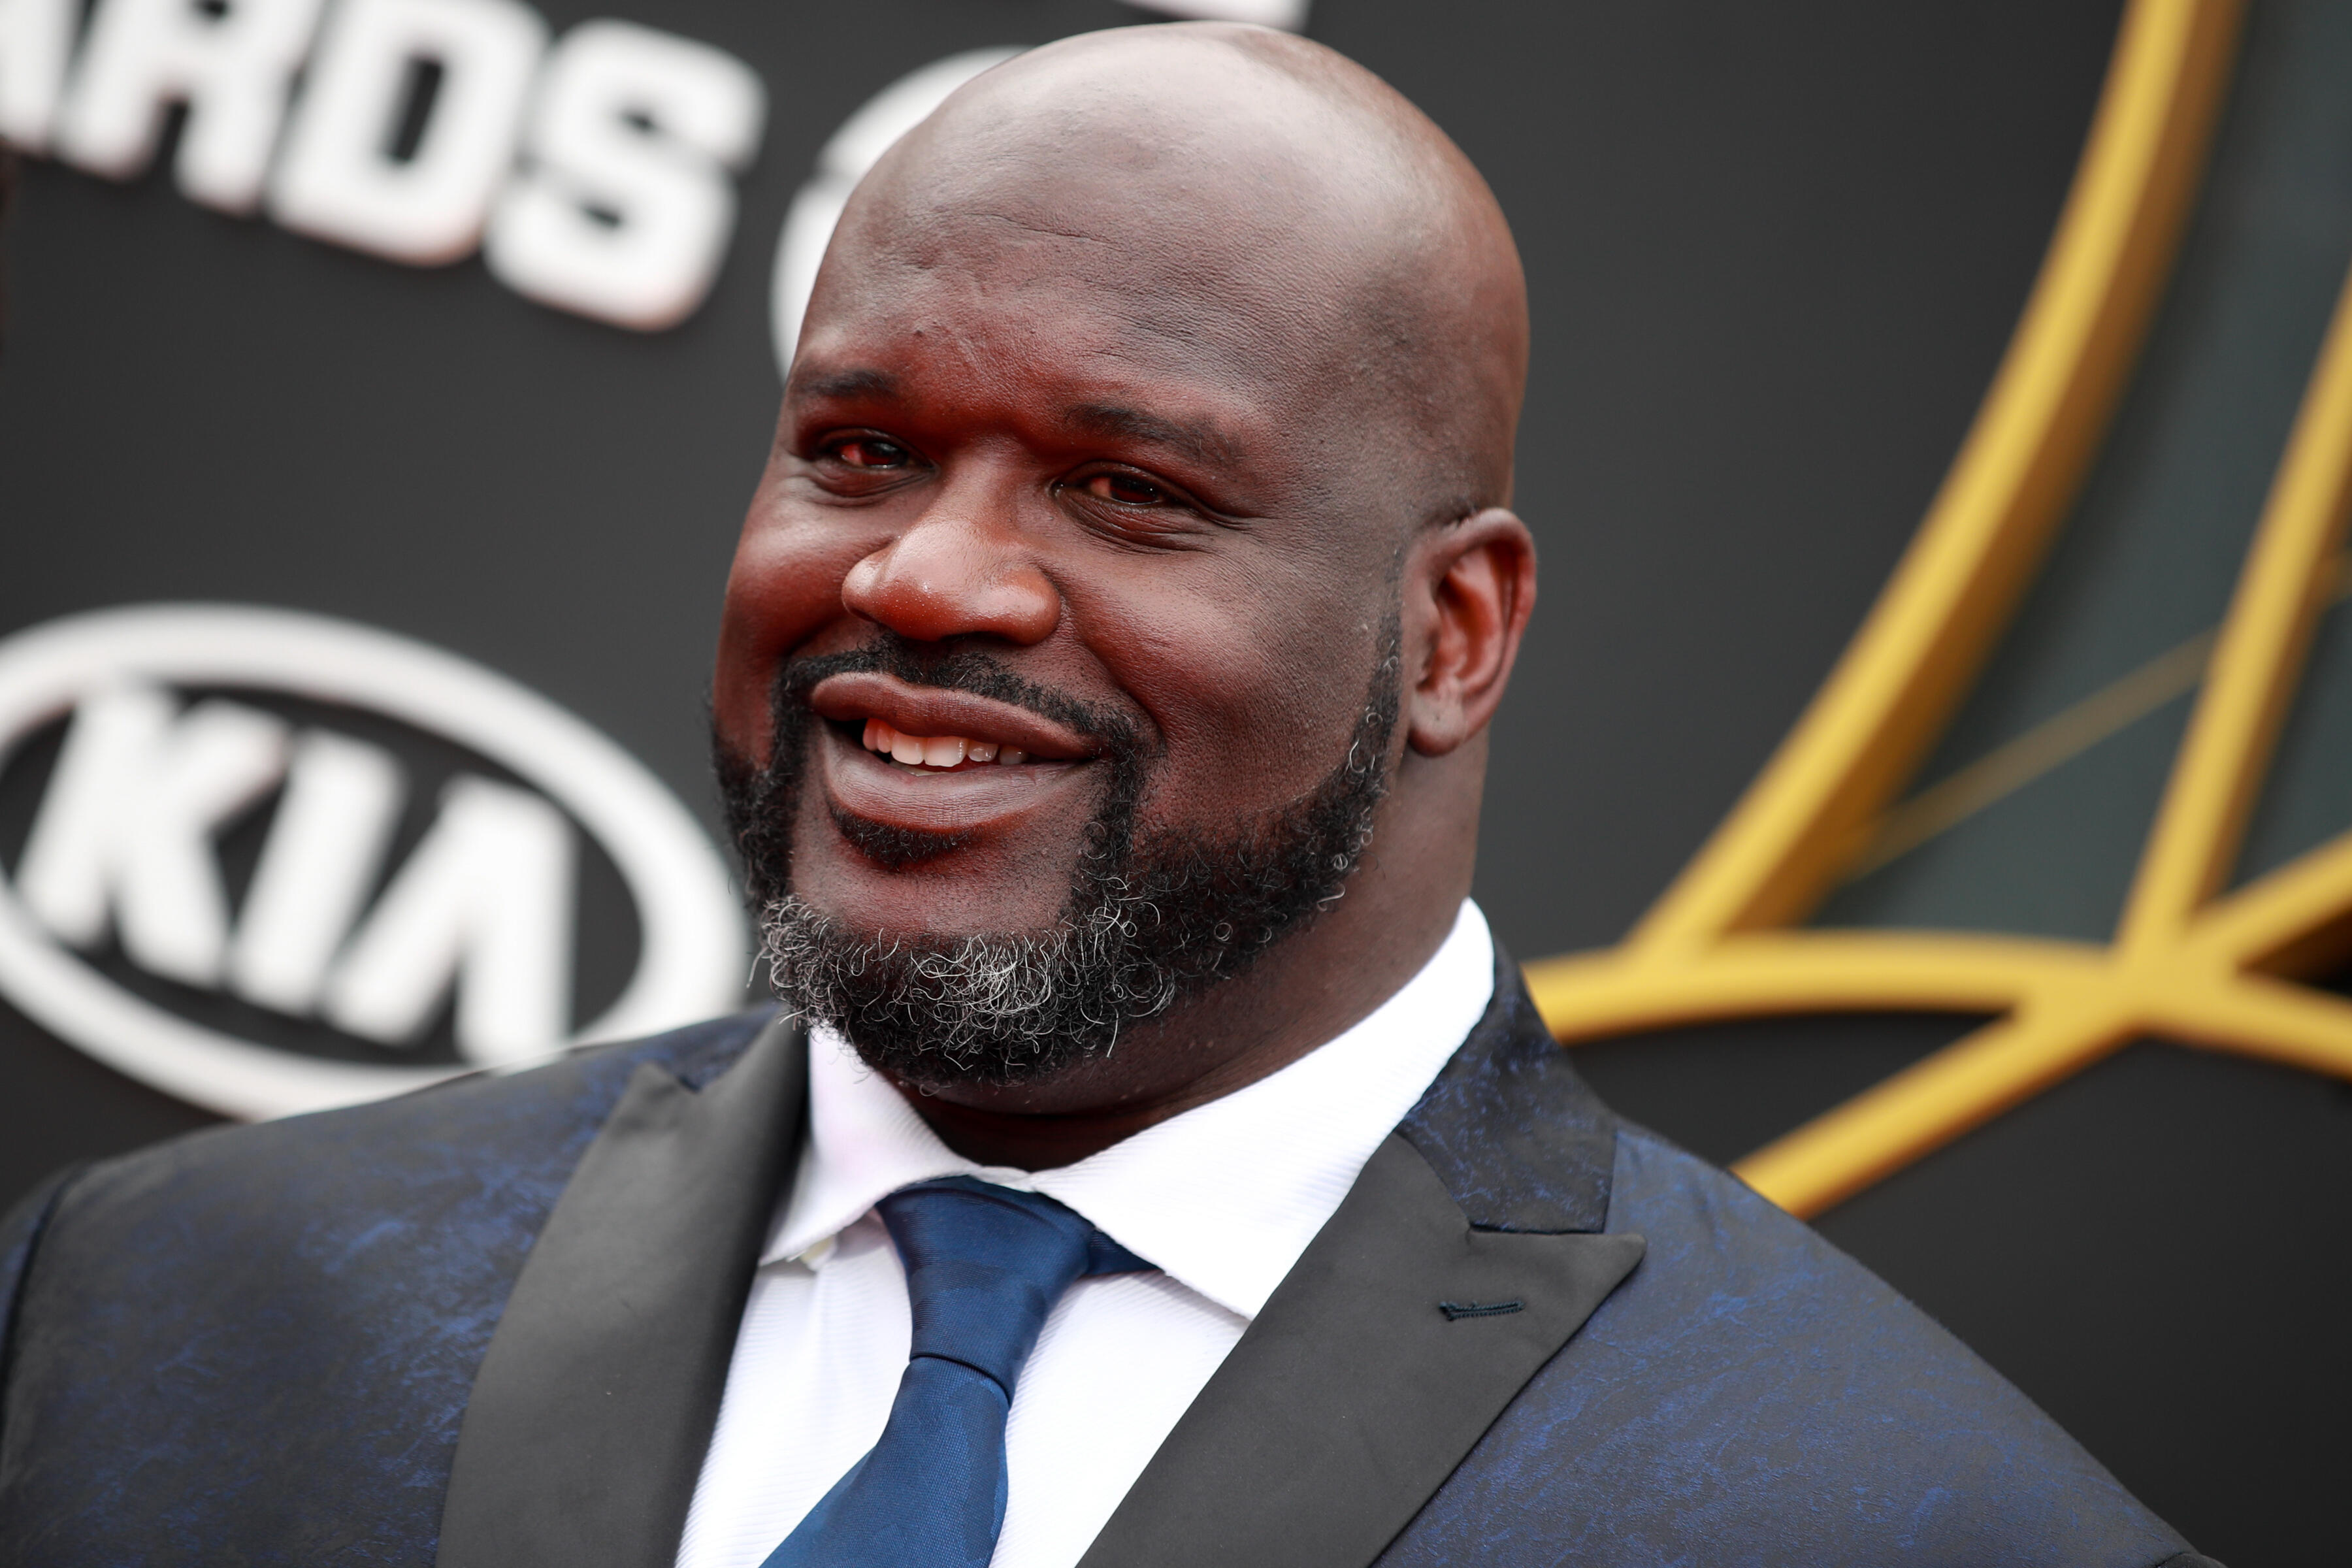 Watch Atlanta Man Propose to Girlfriend With Ring Paid for by Shaq